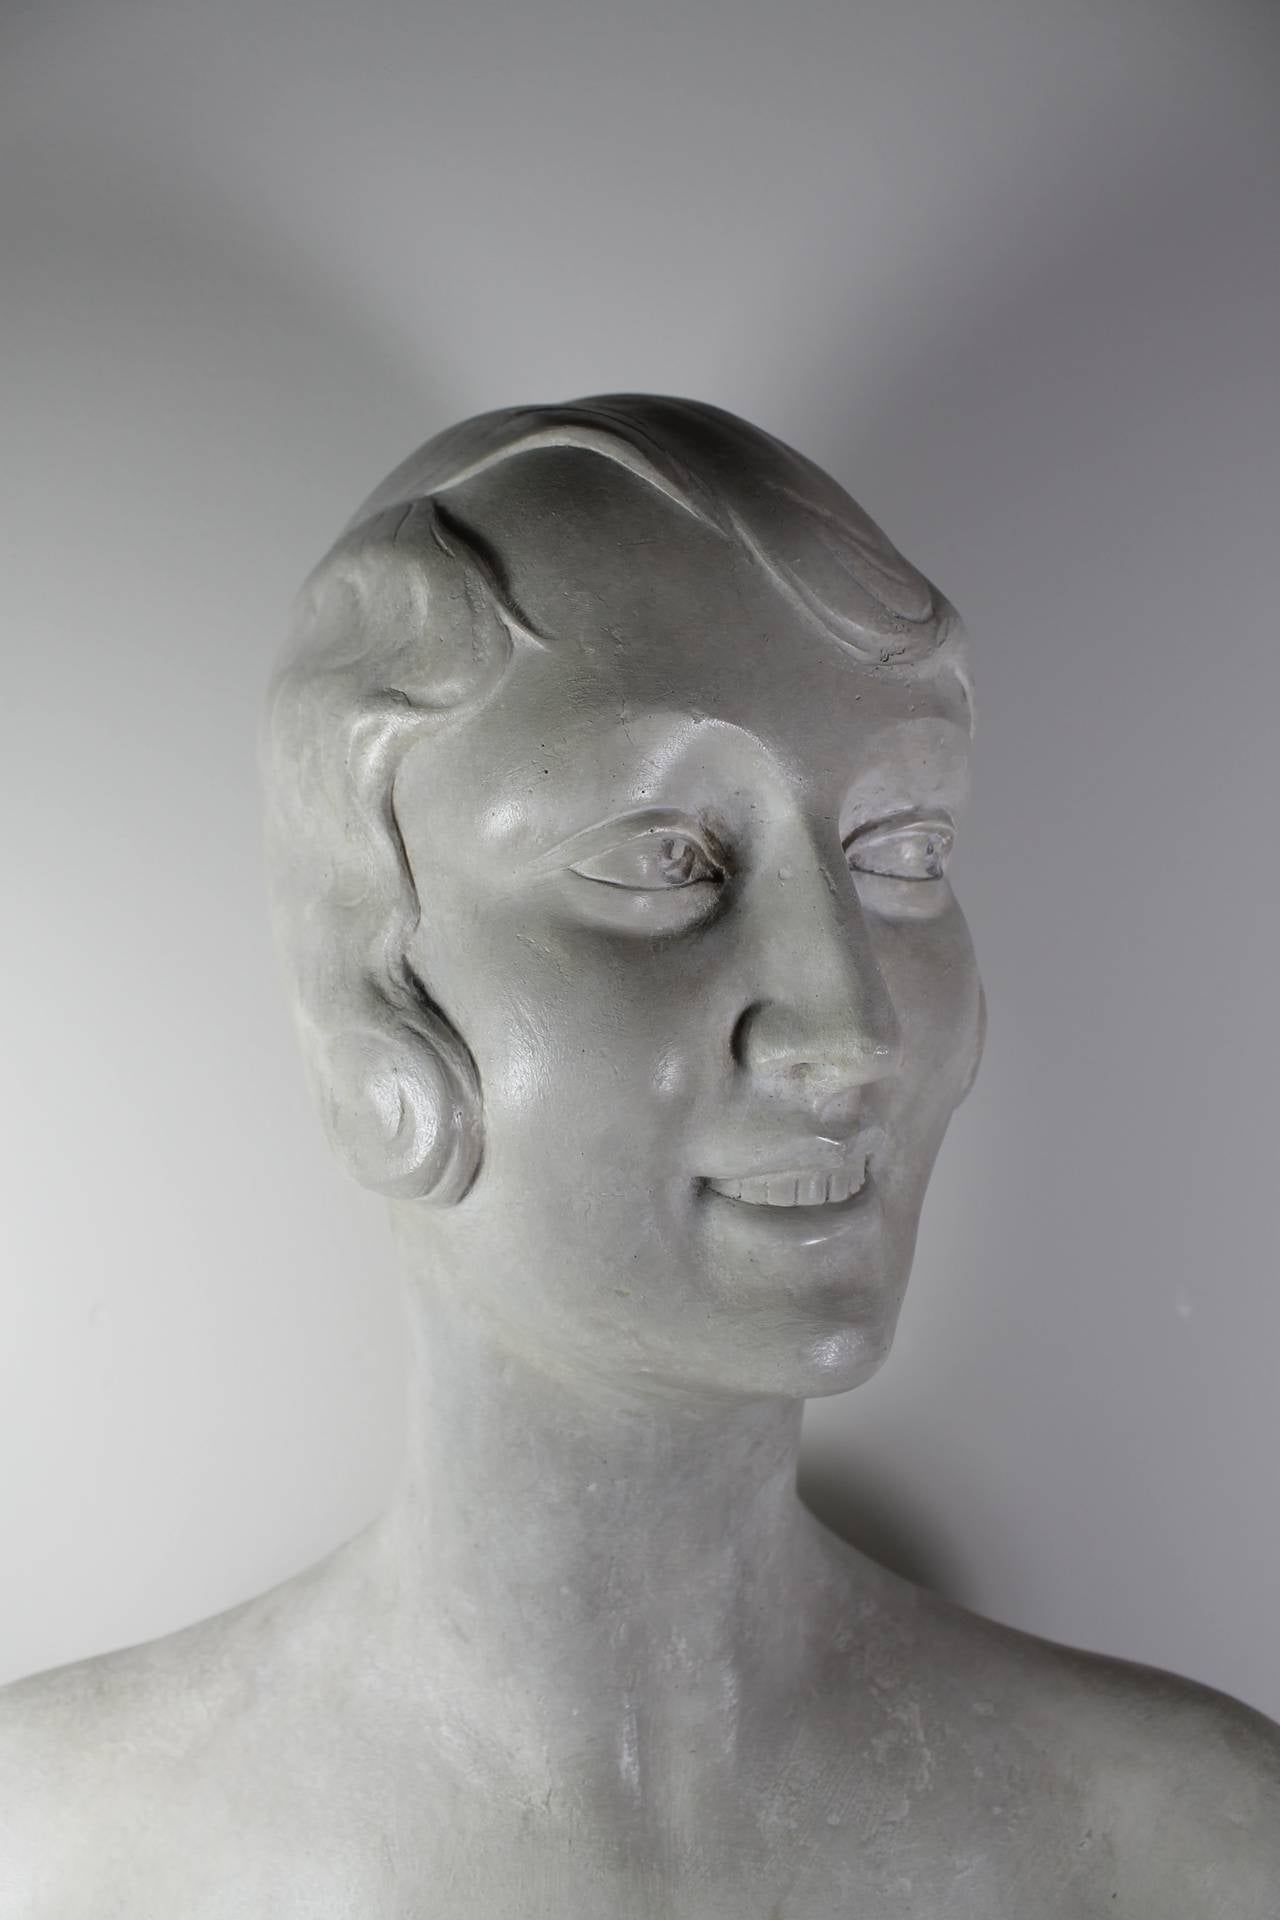 Shop window bust from the 20ties, from P.Collet, Bruxelles